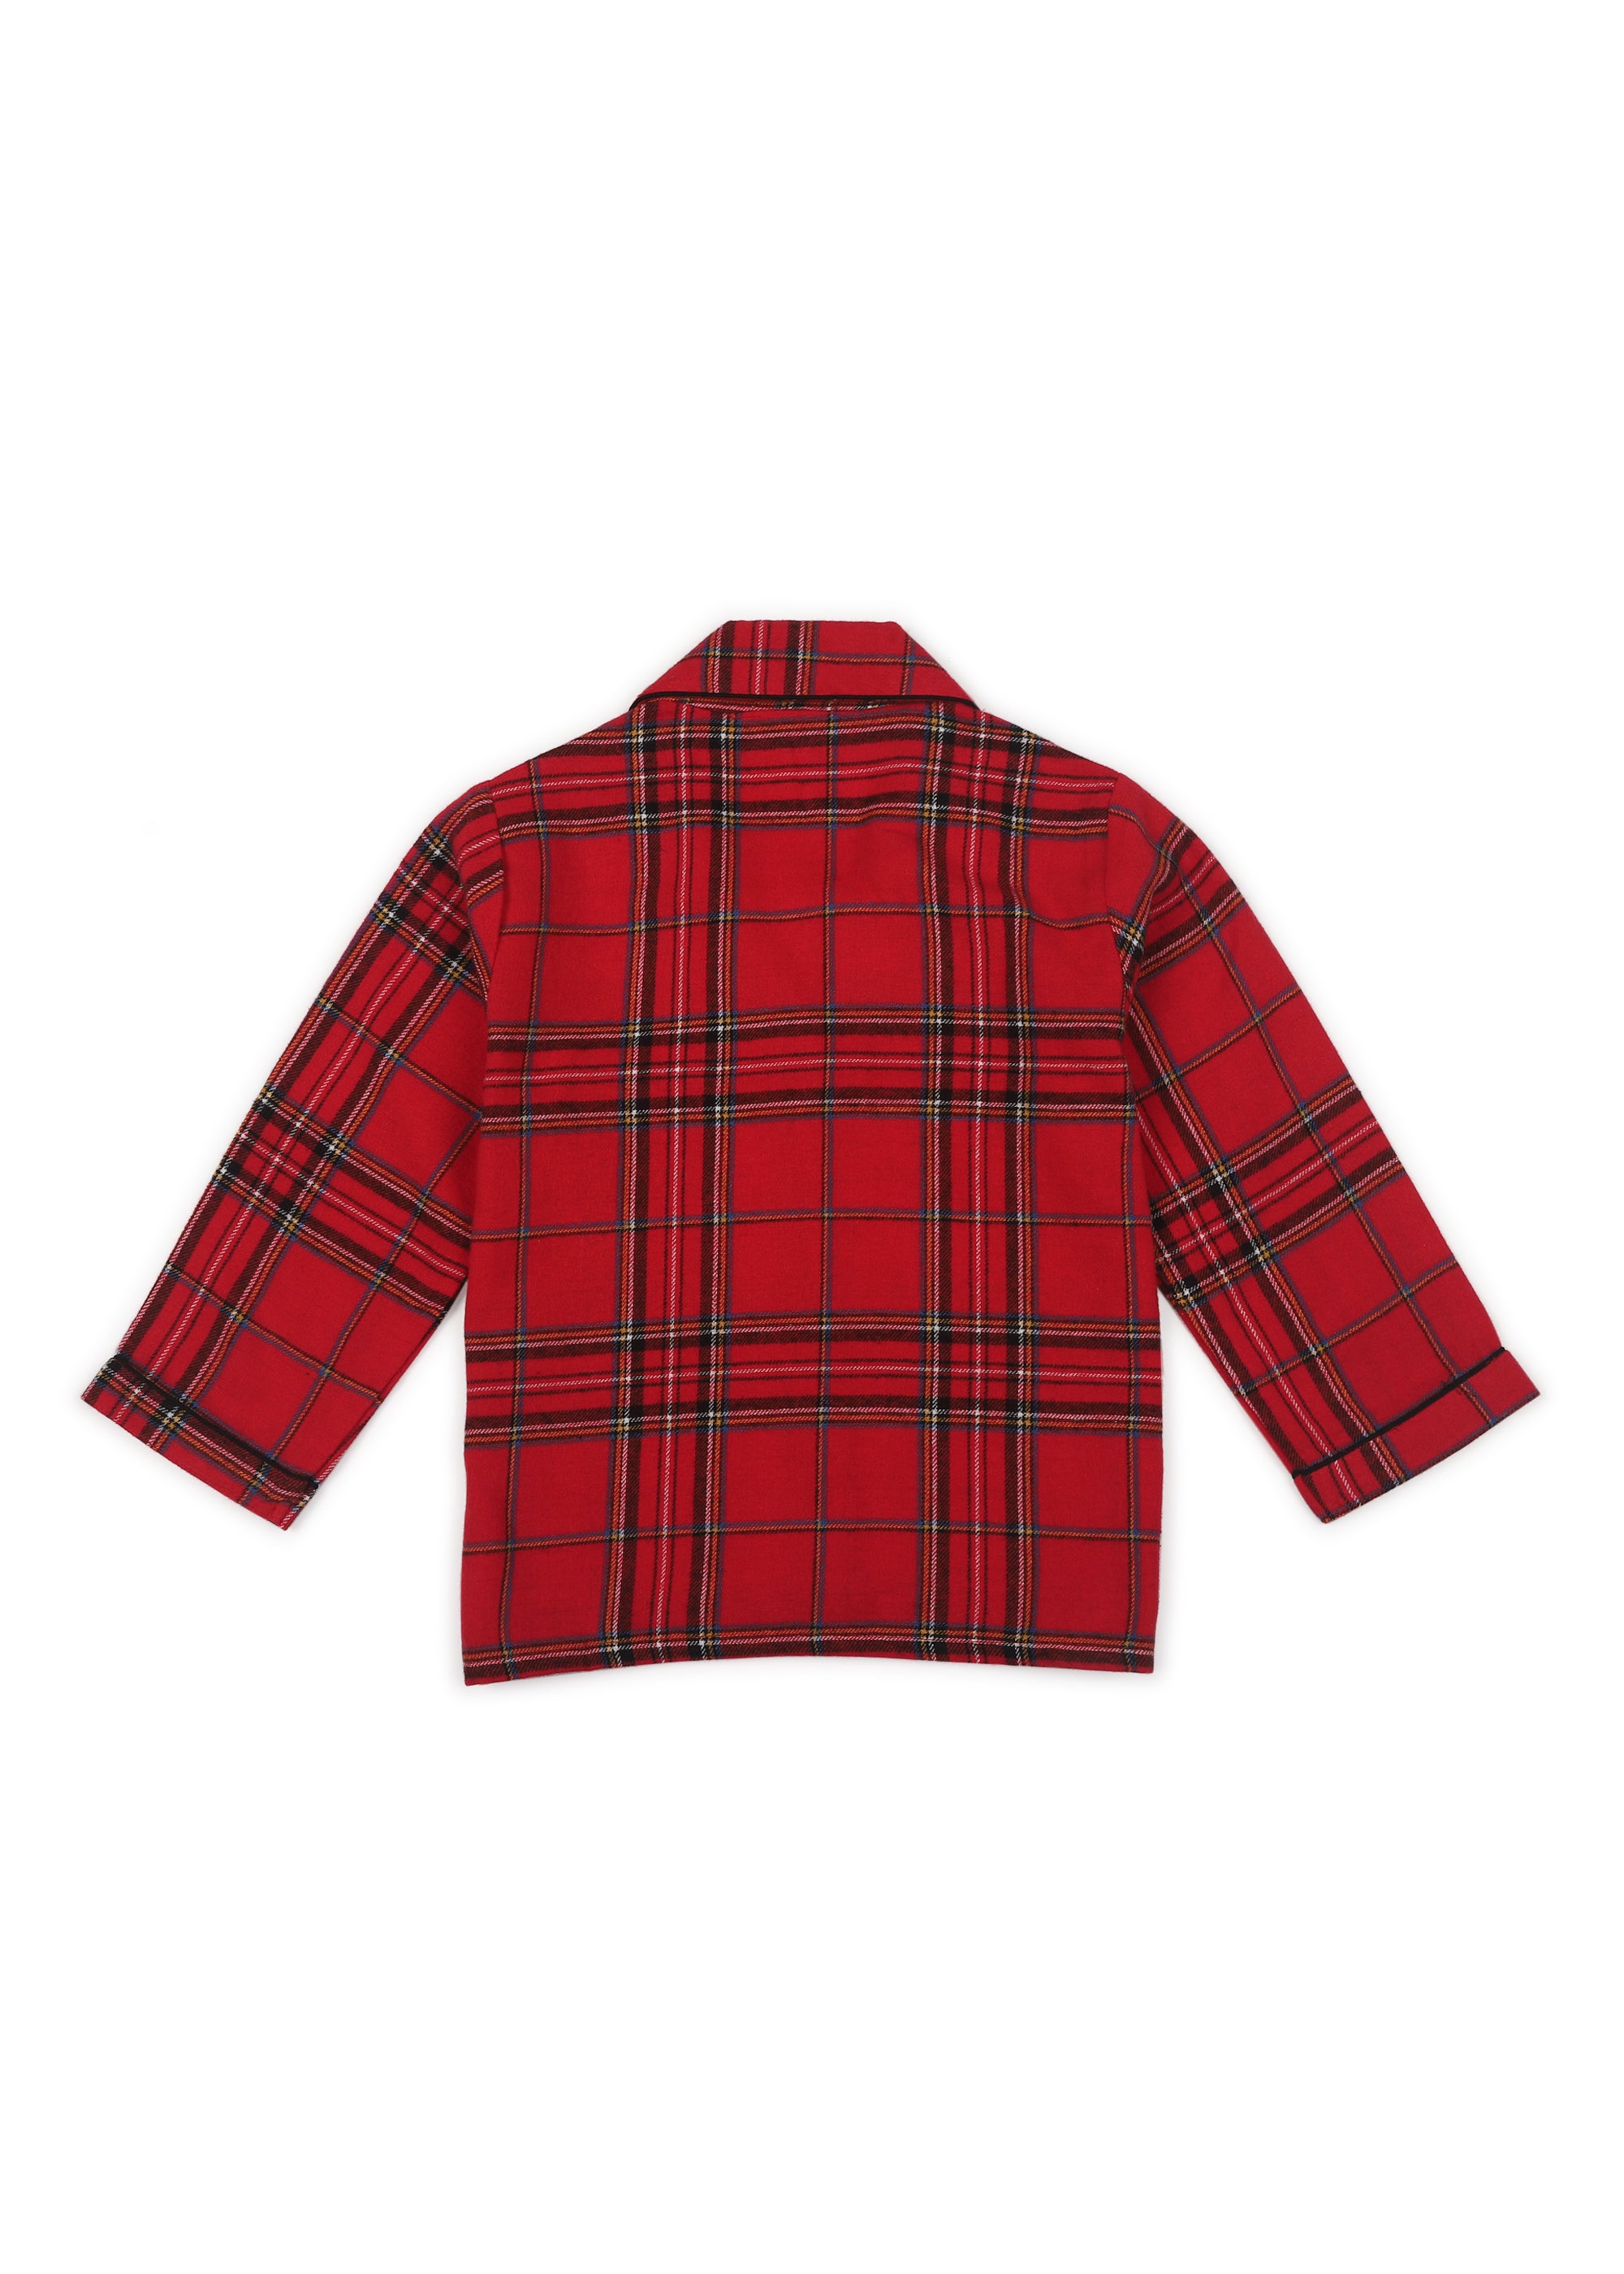 Red and Black Checkered Print Cotton Flannel Long Sleeve Kid's Night Suit - Shopbloom